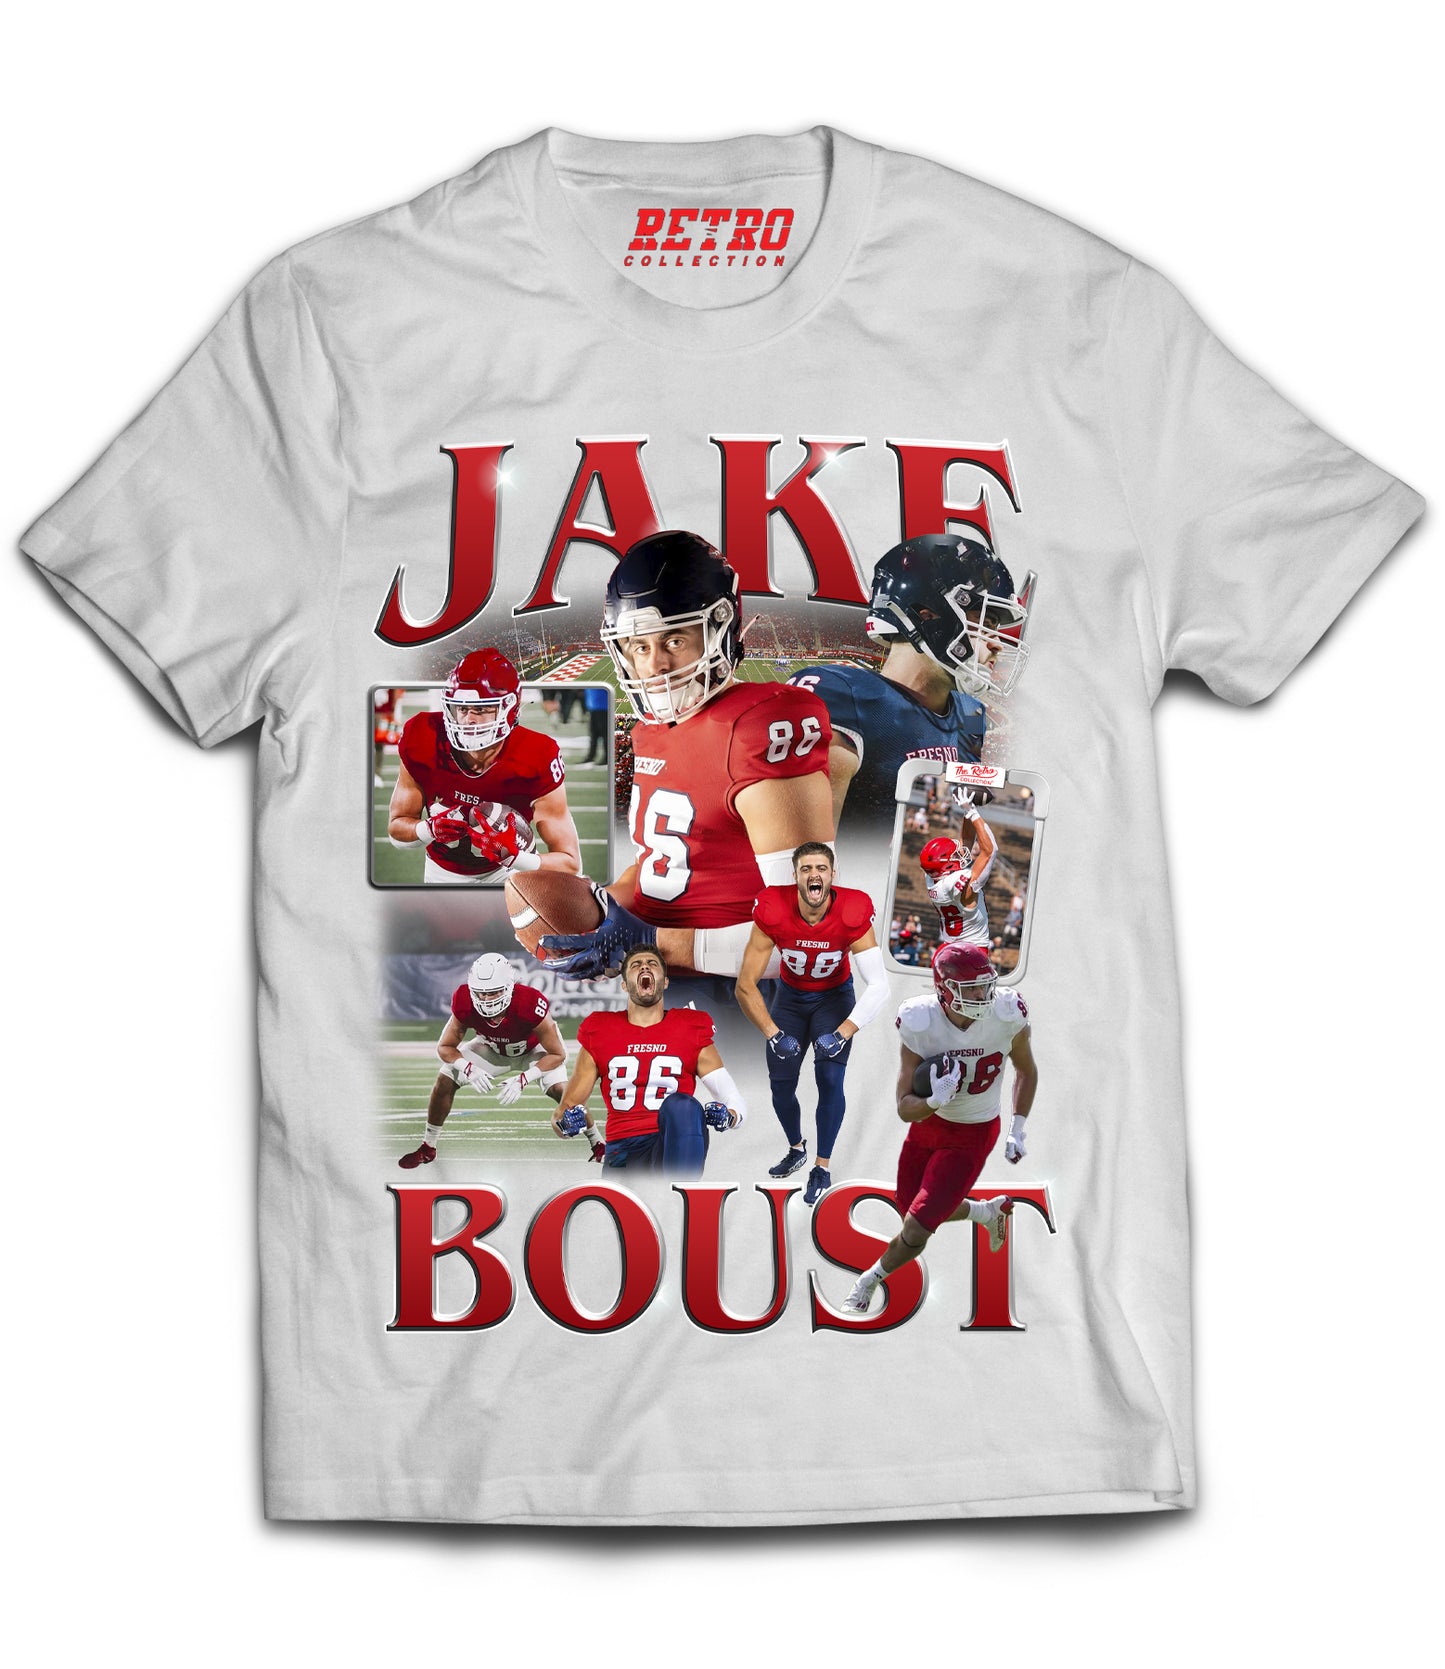 Jake Boust “TE Unstoppable” Tribute Shirt *LIMITED EDITION* (Black, Red, White)